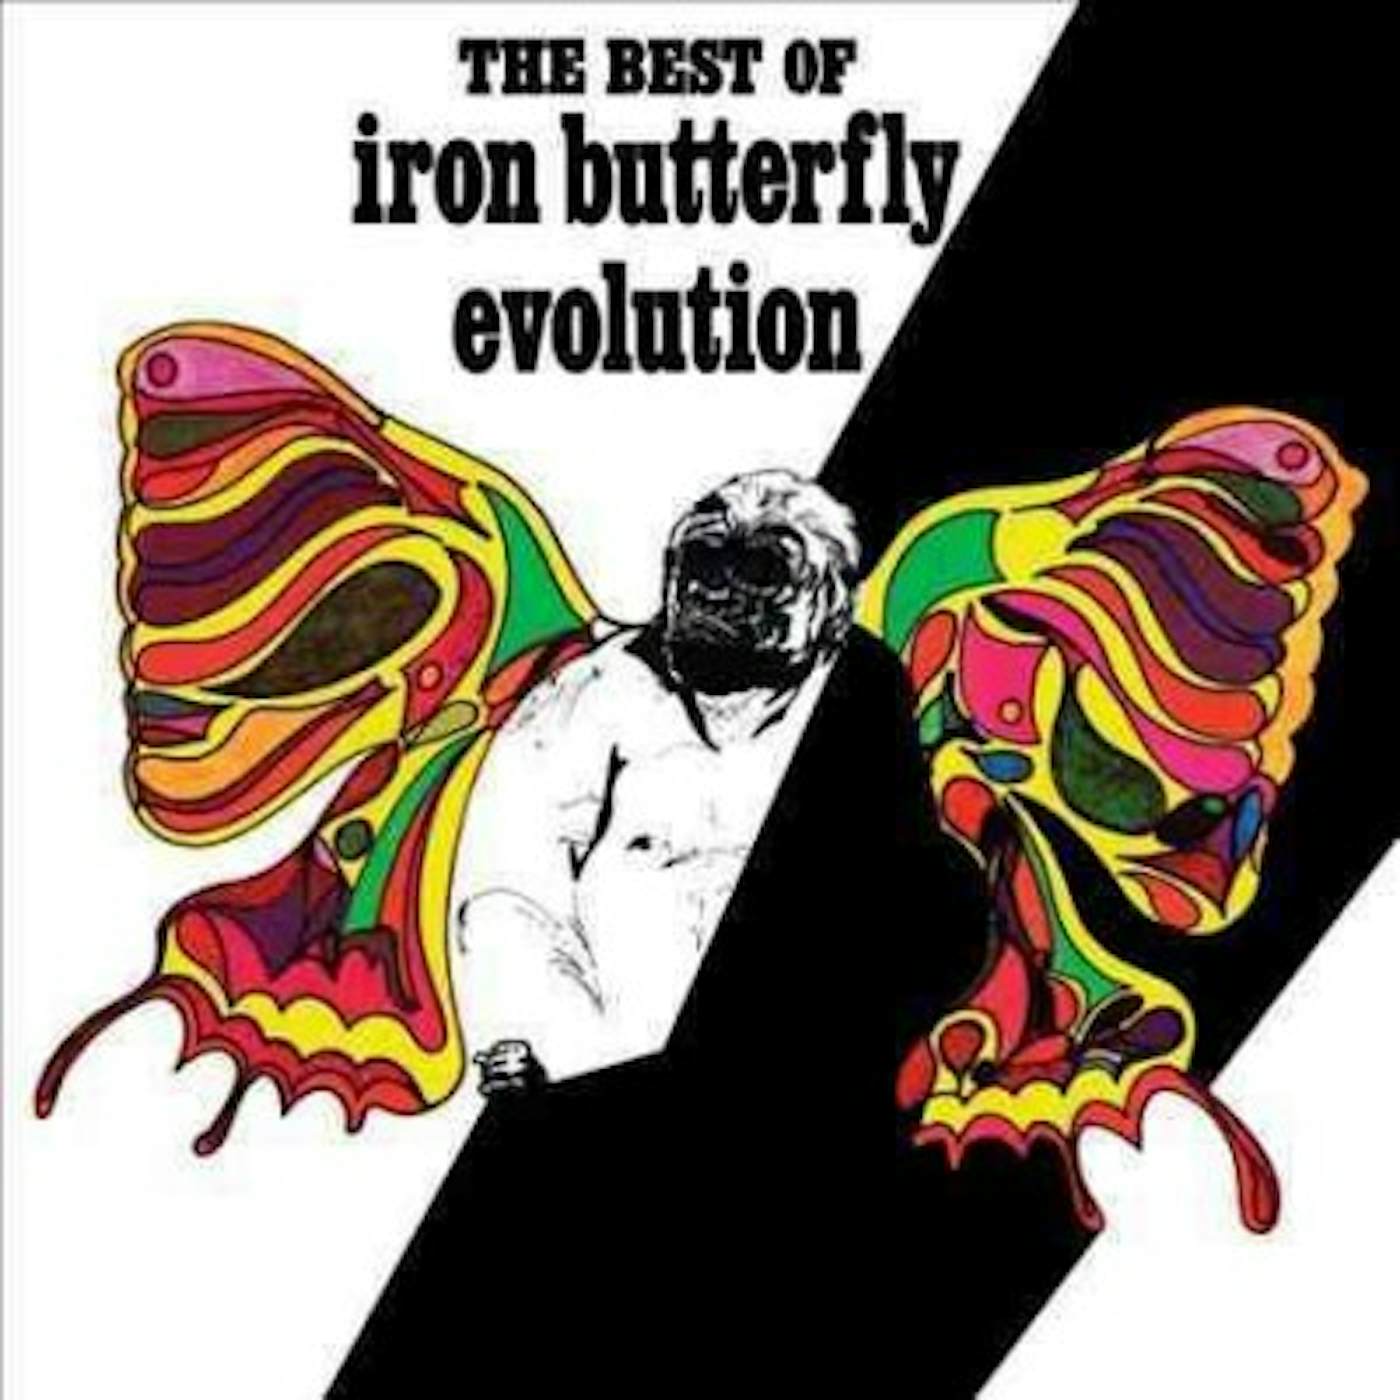 EVOLUTION: BEST OF IRON BUTTERFLY Vinyl Record